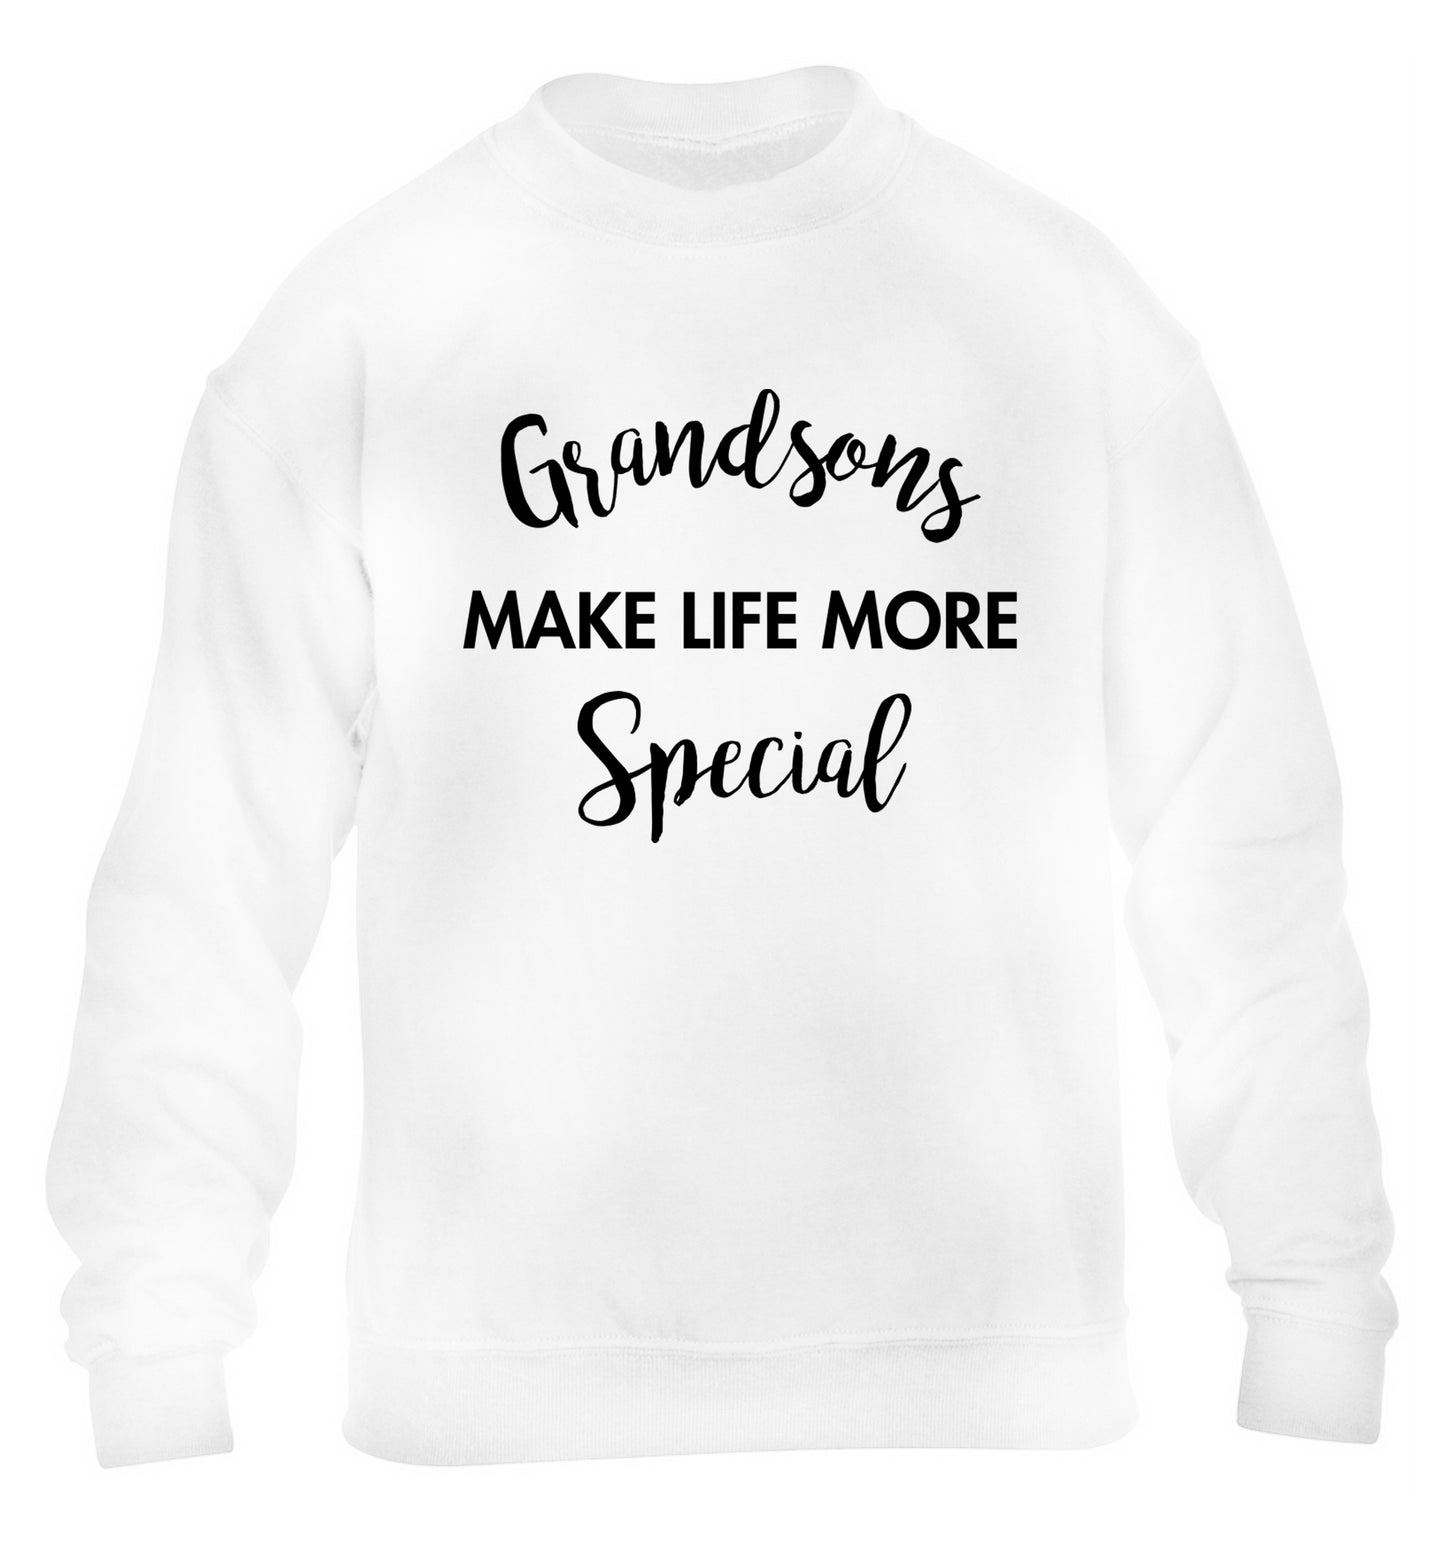 Grandsons make life more special children's white sweater 12-14 Years